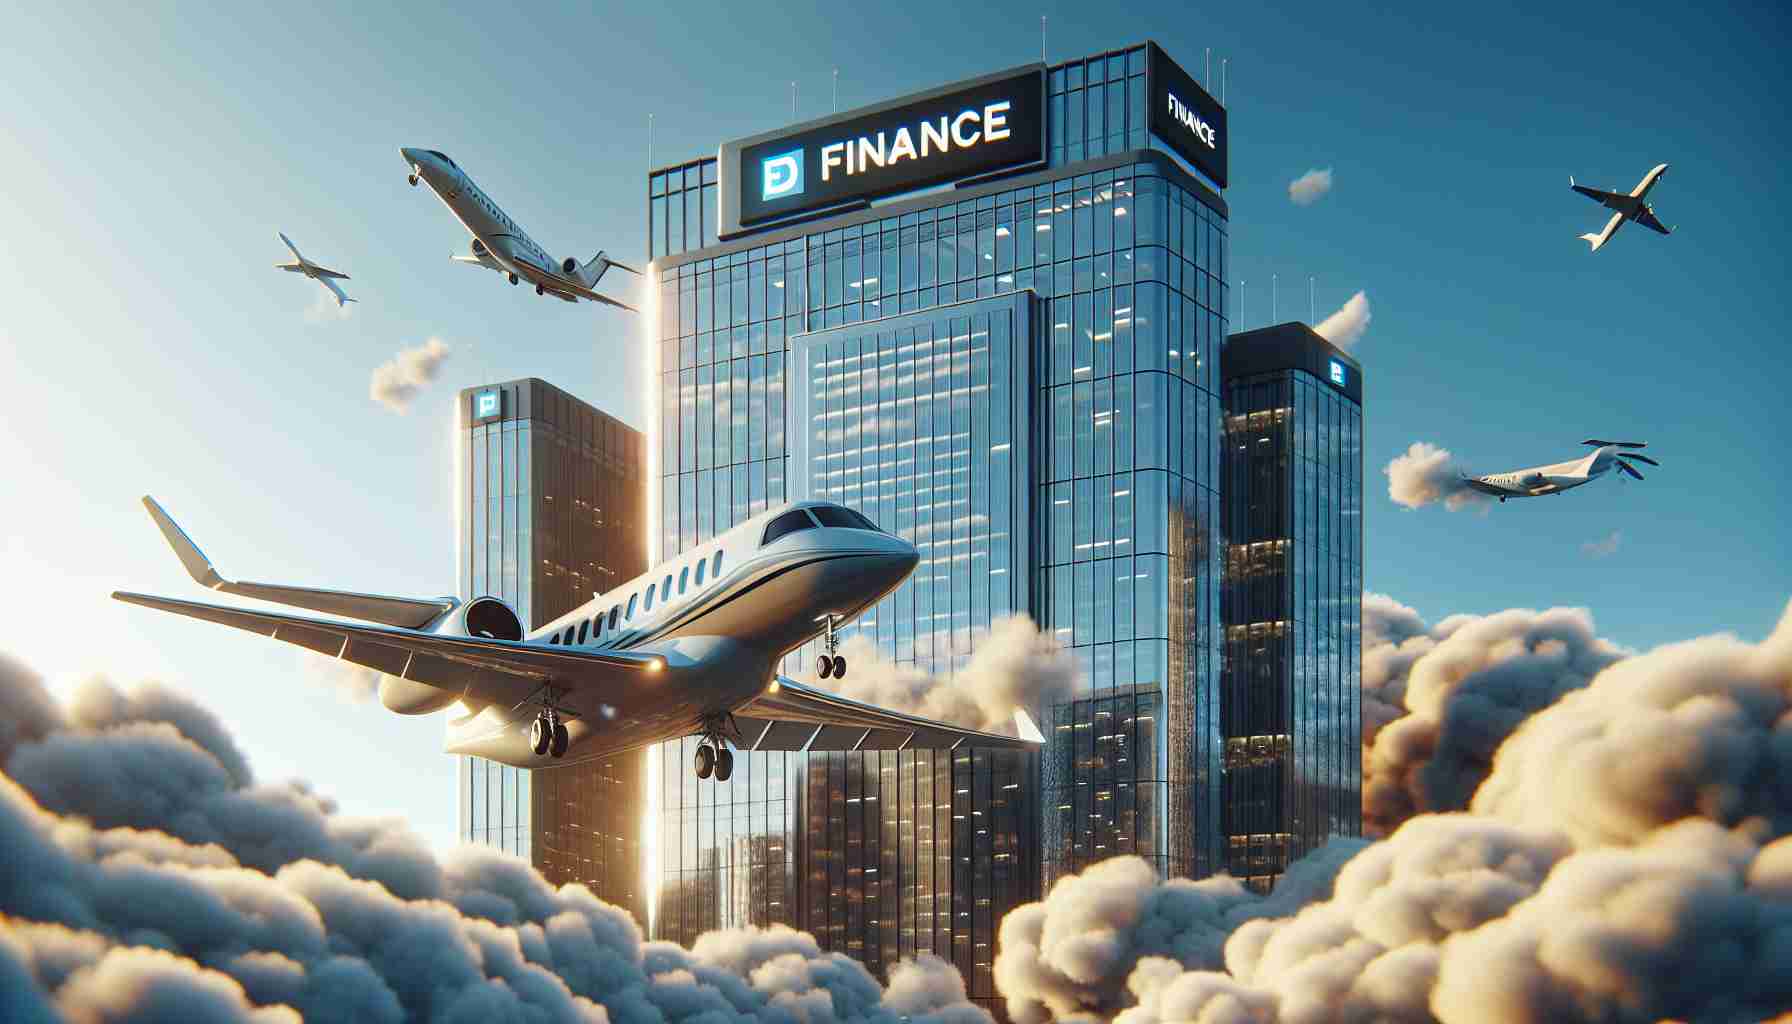 Visualize a realistic HD image of a thriving finance company that specializes in aviation. Picture this: a modern skyscraper with signage displaying the company logo, set against a blue sky with a few fluffy clouds. Nearby, a private airplane descends for a landing. The plane is immaculate, shining under the sun, emblazoning the company's image as a rising player in the financial sector.